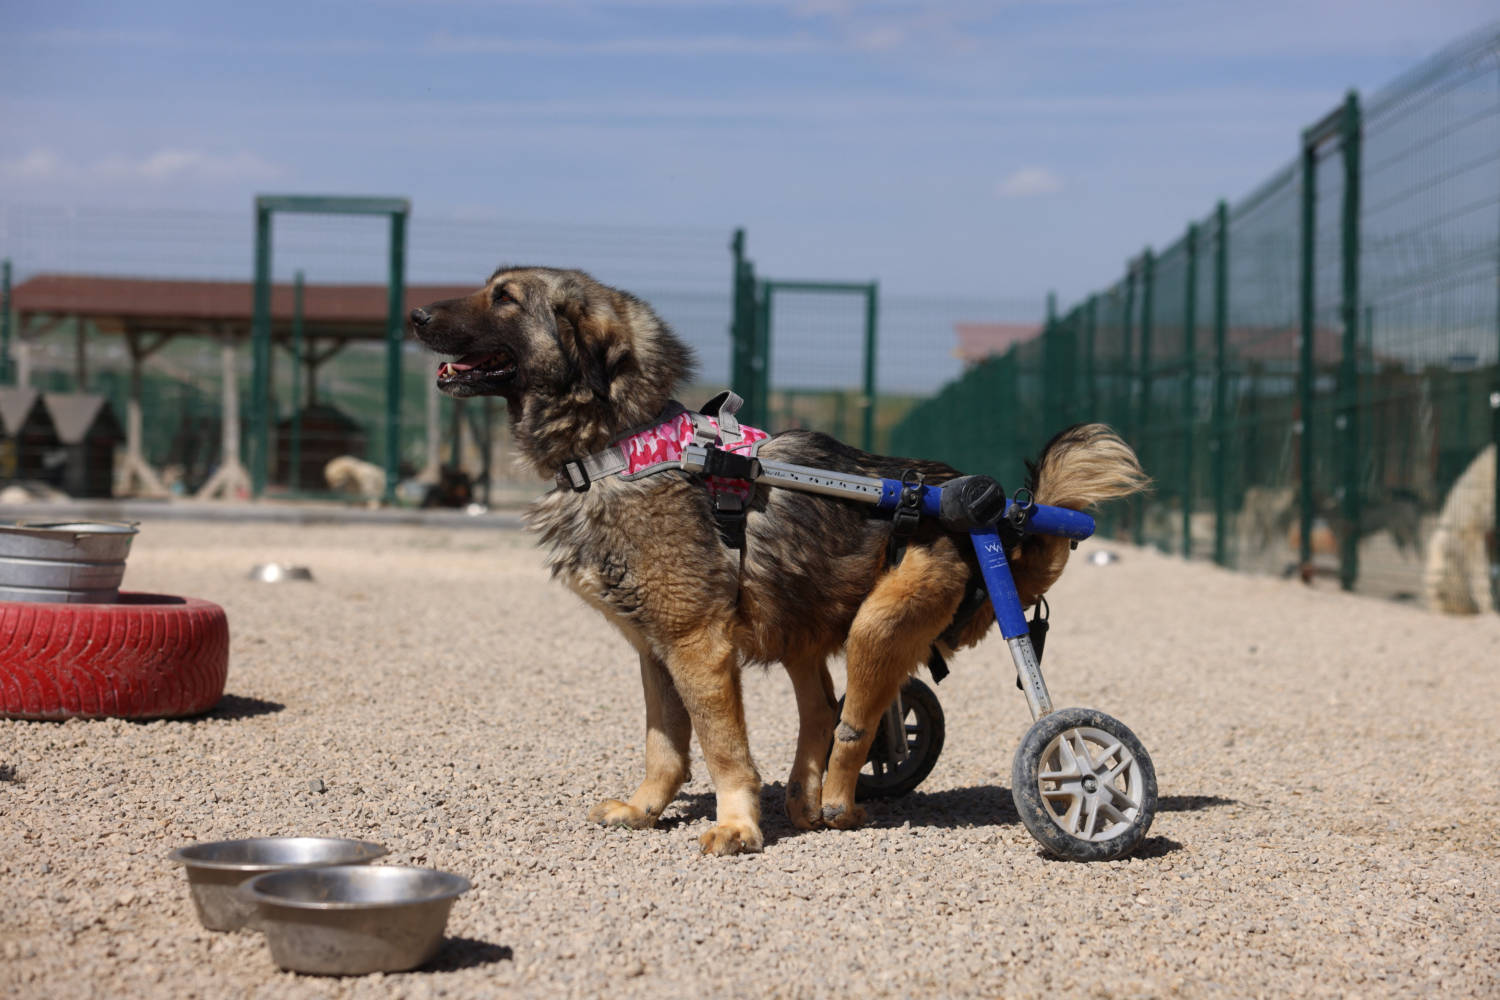 A Disabled Dog Uses A Mobility Aid At An Animal Shelter In Ankara